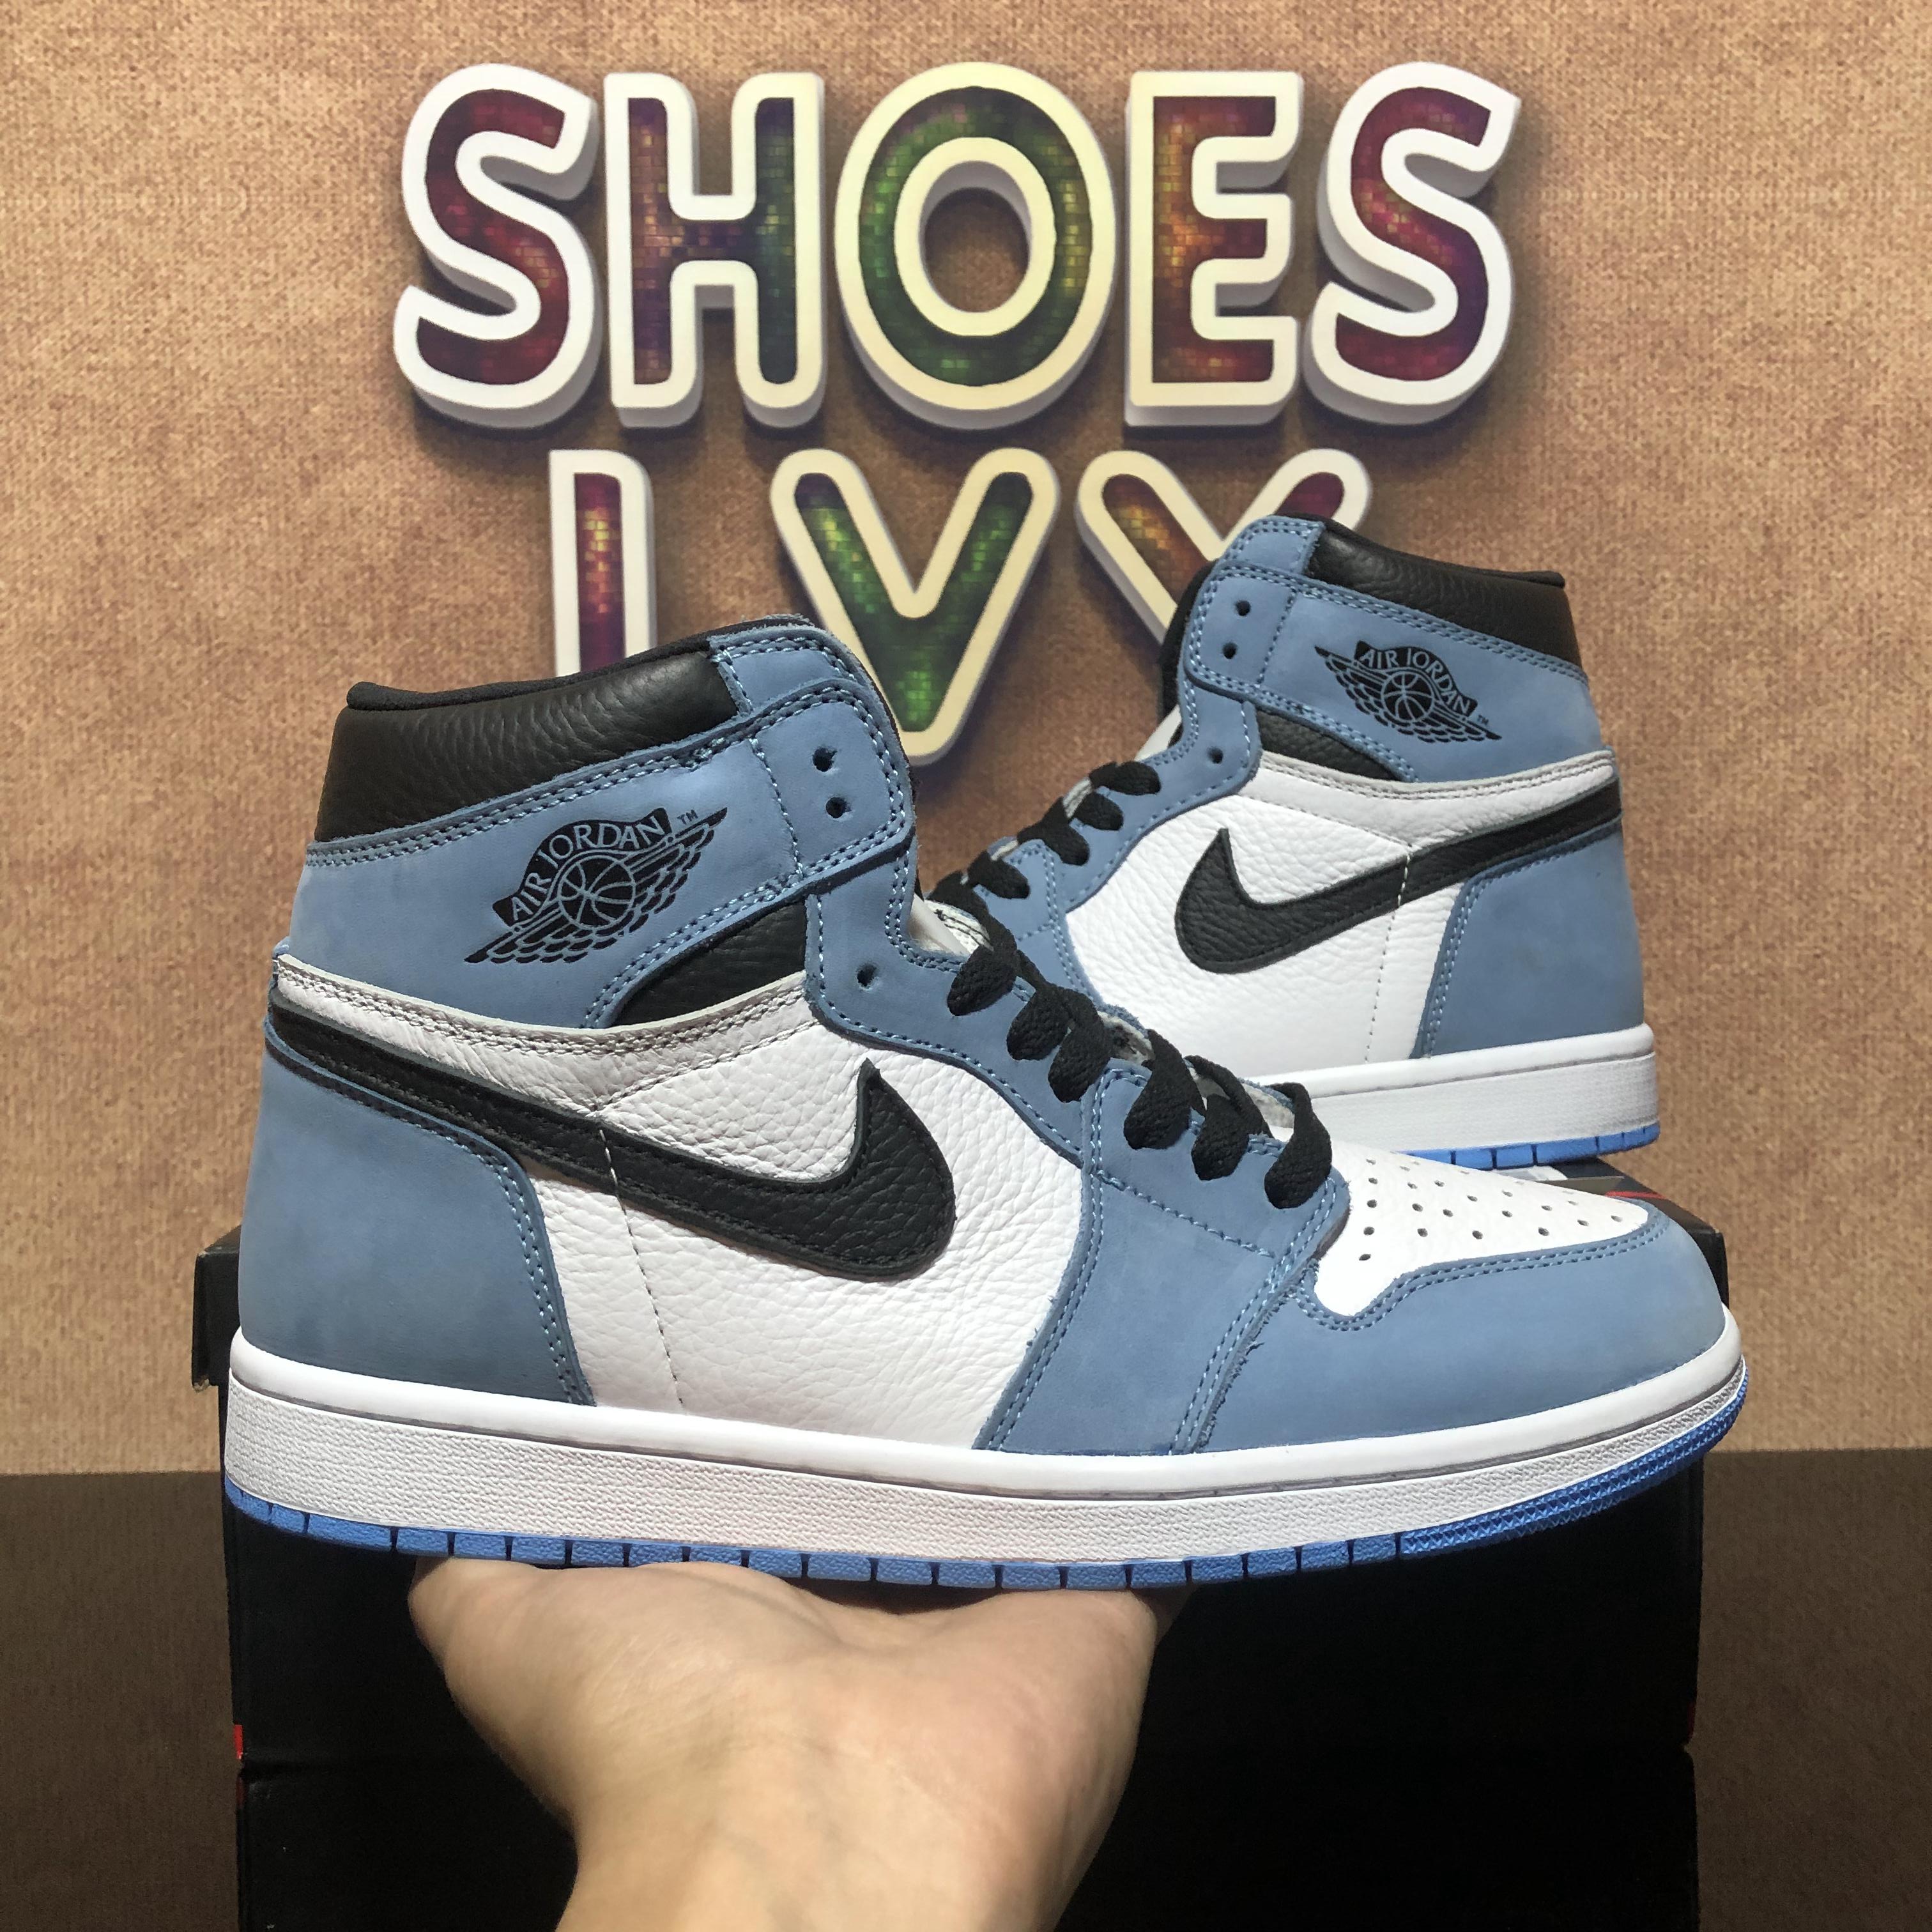 

Top Quality Travis Scotts X Nike Air Jordan 1 High Basketball Shoes UNC University Blue Chicago Obsidian Royal Toe Shattered Men Women Sport Trainer Sneaker With Box, Style 49